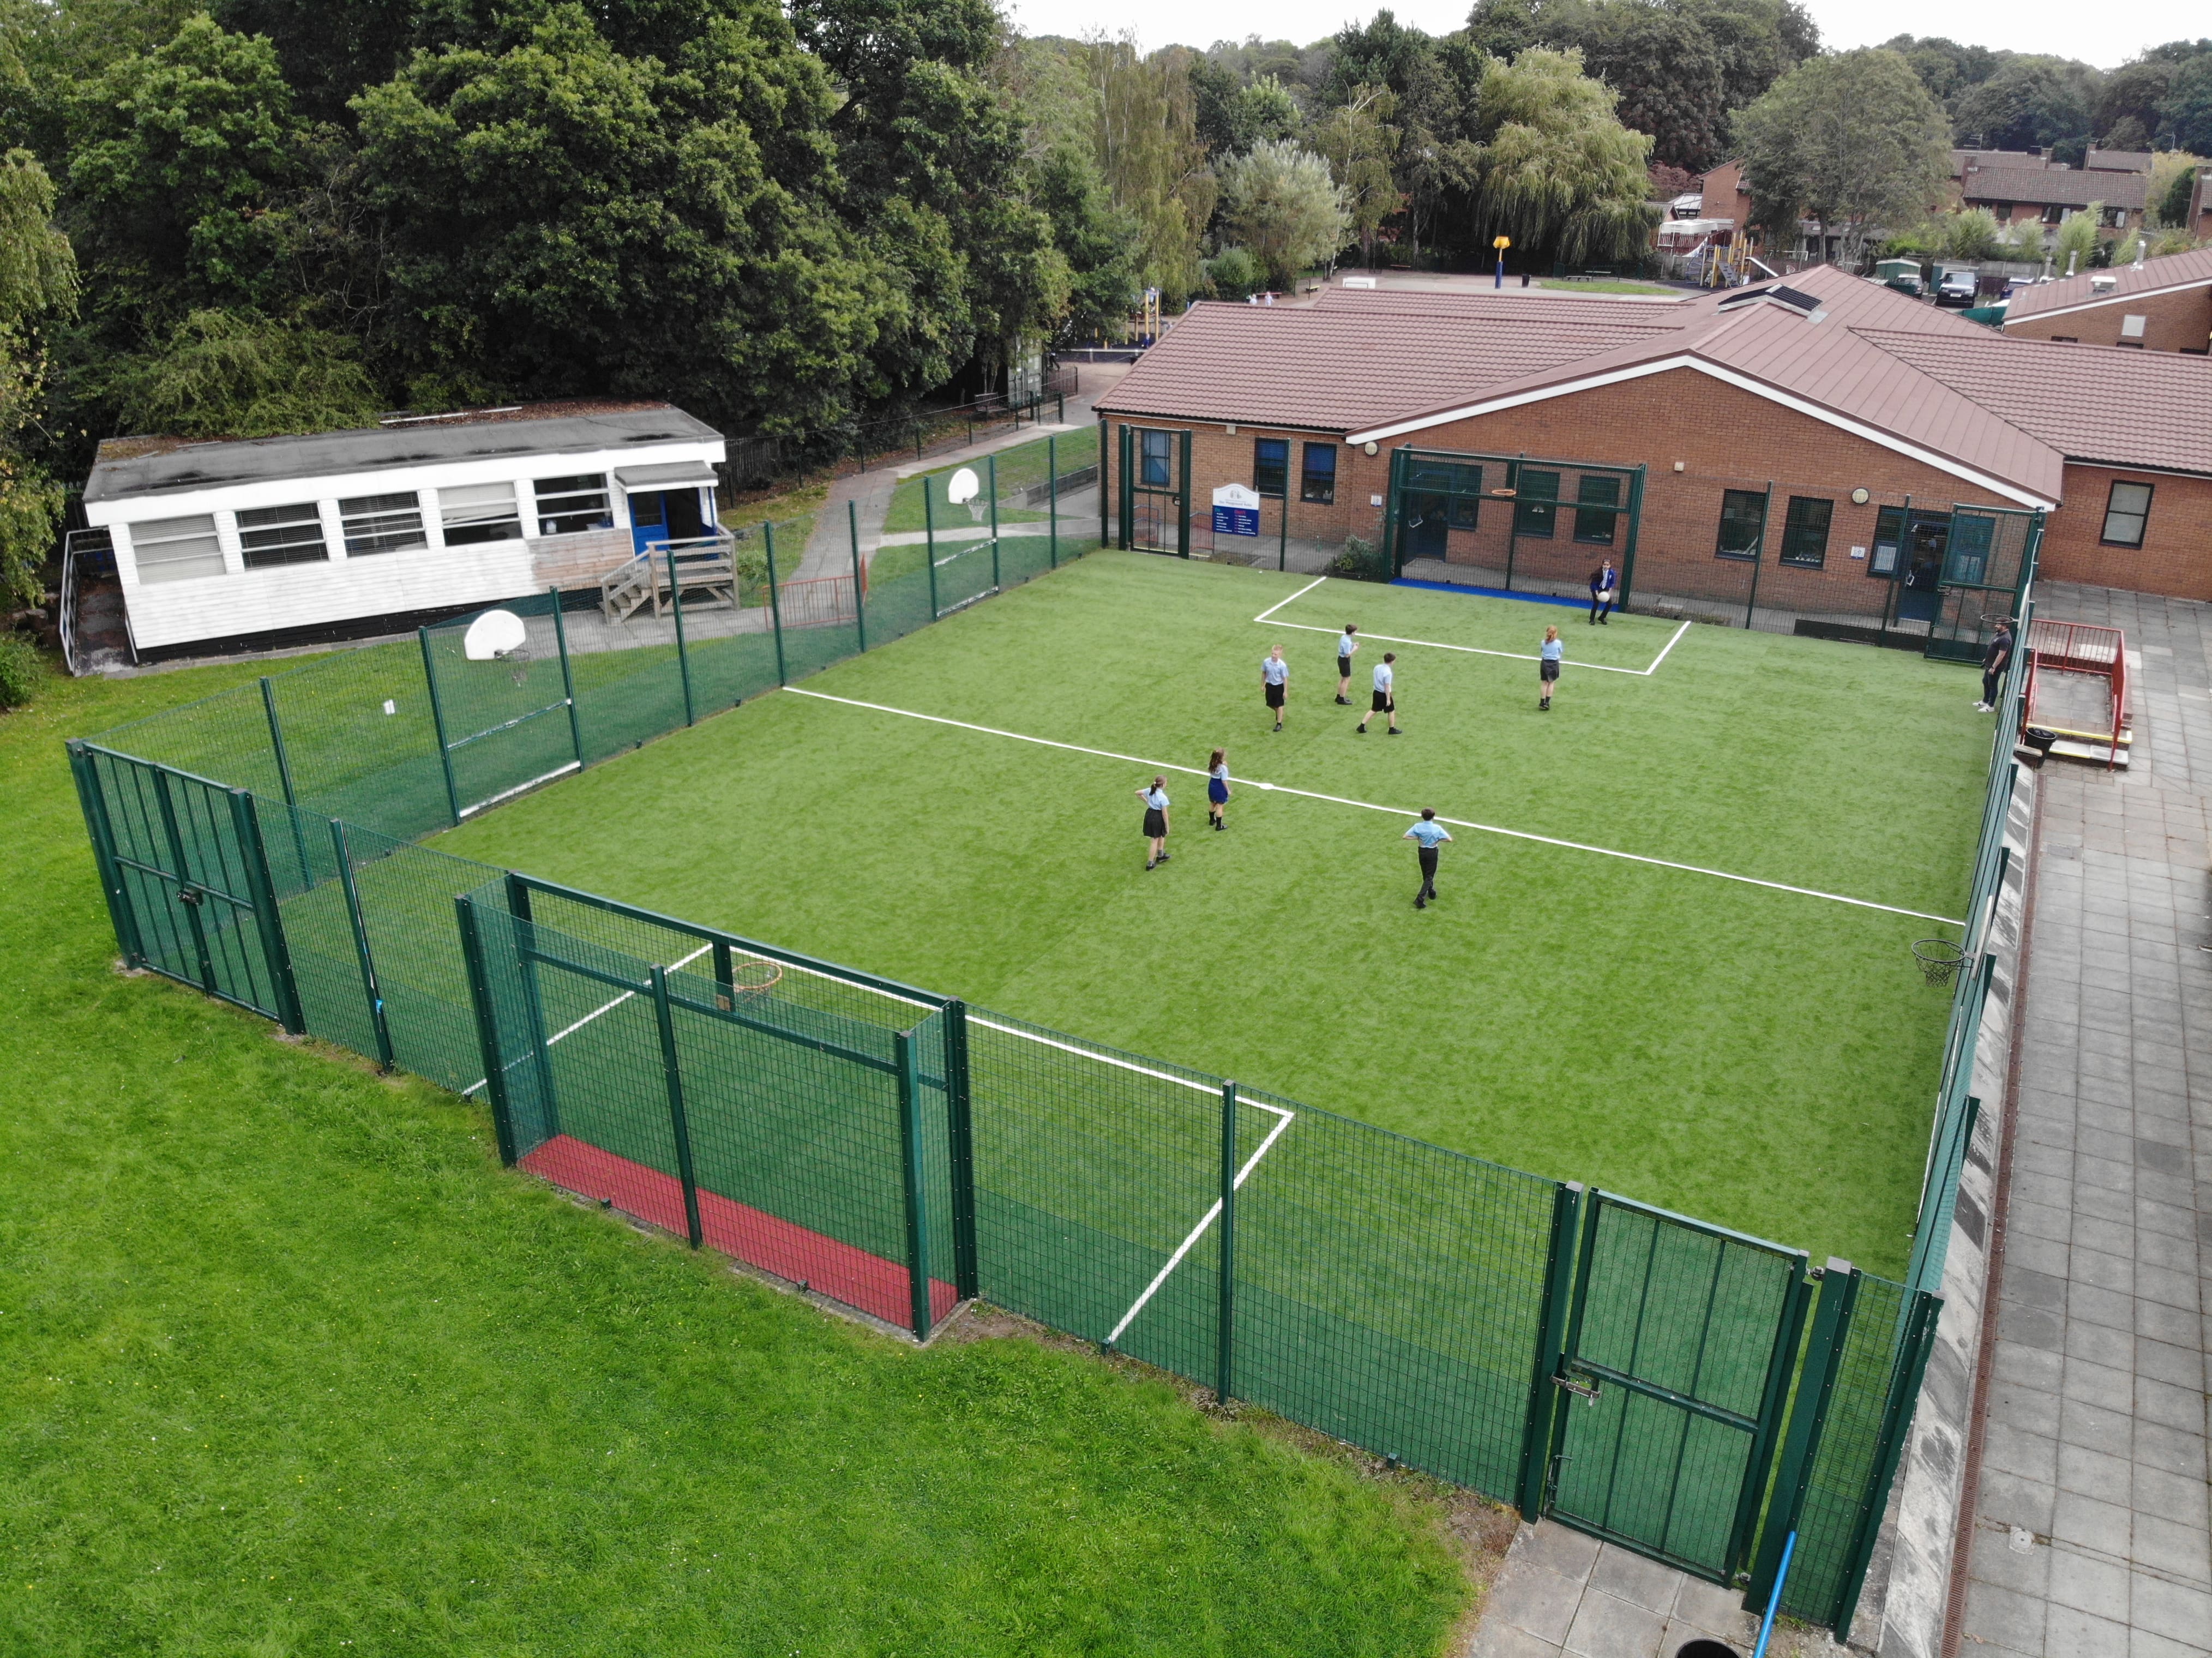 A drone shot of the MUGA from above. The MUGA is green with white lines which are football markings. The floor of both goals are different colours, that being red and blue. There are basketball hoops on the green fence that goes around the pitch.